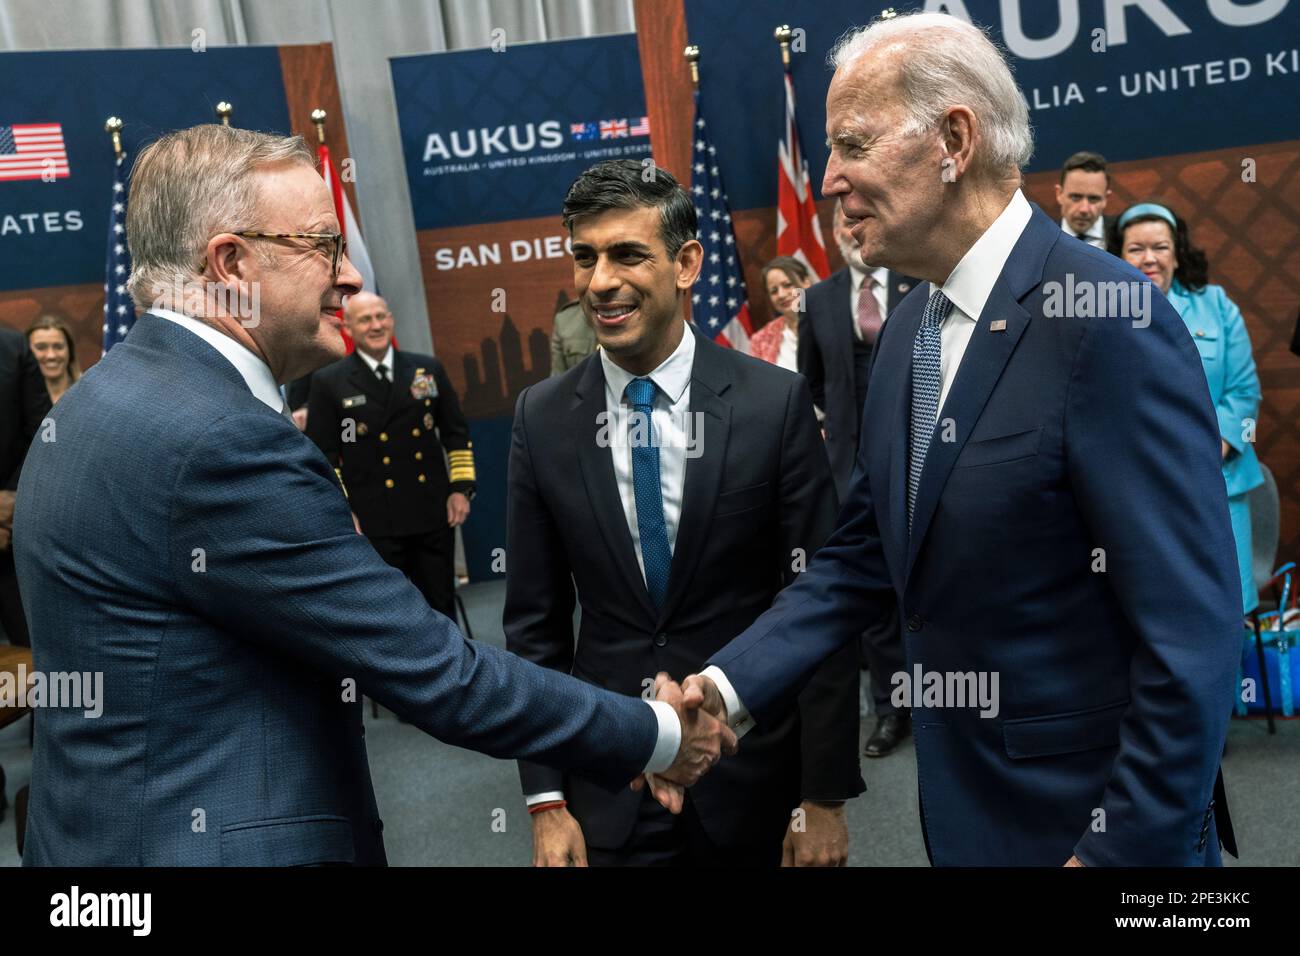 San Diego, United States of America. 13 March, 2023. U.S President Joe Biden, right, greets Australian Prime Minister Anthony Albanese, left, and British Prime Minister Rishi Sunak, center, before a trilateral meeting at Point Loma naval base March 13, 2023 in San Diego, California. The three leaders of the AUKUS security pact agreed on expanding their nuclear-powered submarine fleet.  Credit: Chad McNeeley/DoD Photo/Alamy Live News Stock Photo